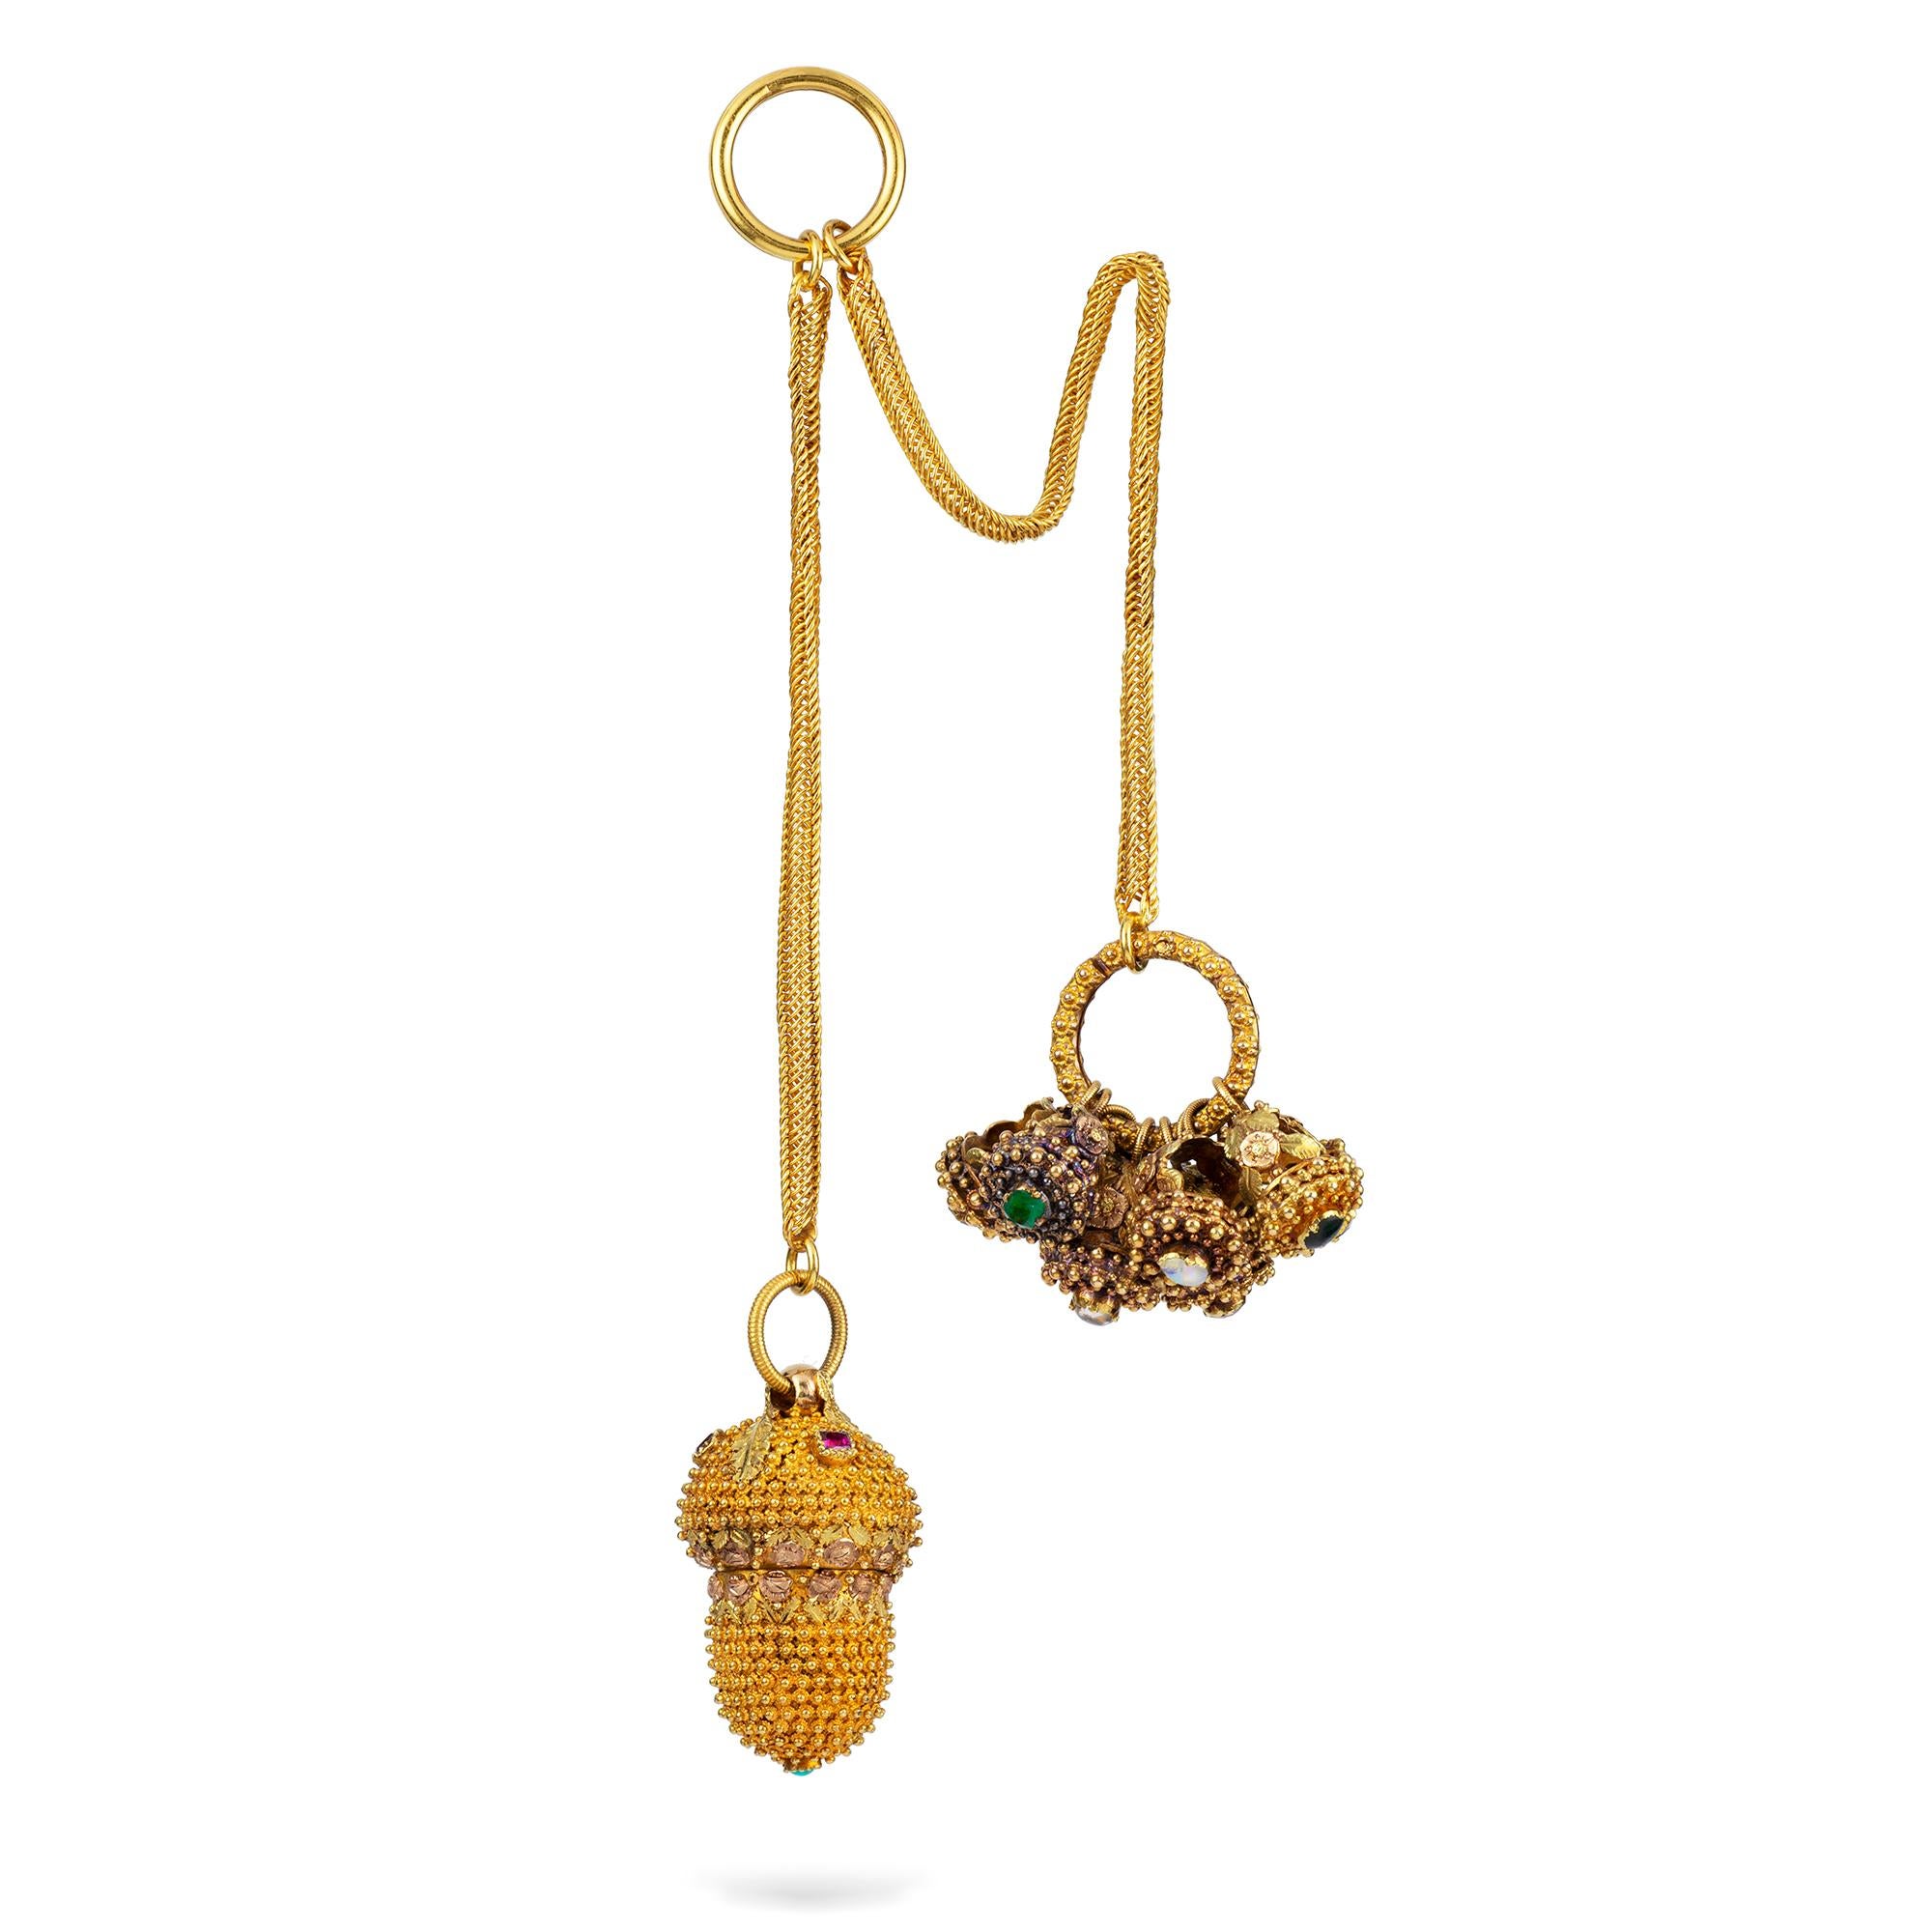 A Georgian gold fob, comprising a three-coloured gold, ruby and turquoise set pomander, in the form of an acorn, and a bunch of eight miniature gem-set rings, both suspended by two mesh gold chains with a circular top, circa 1800, gross weight 19.5